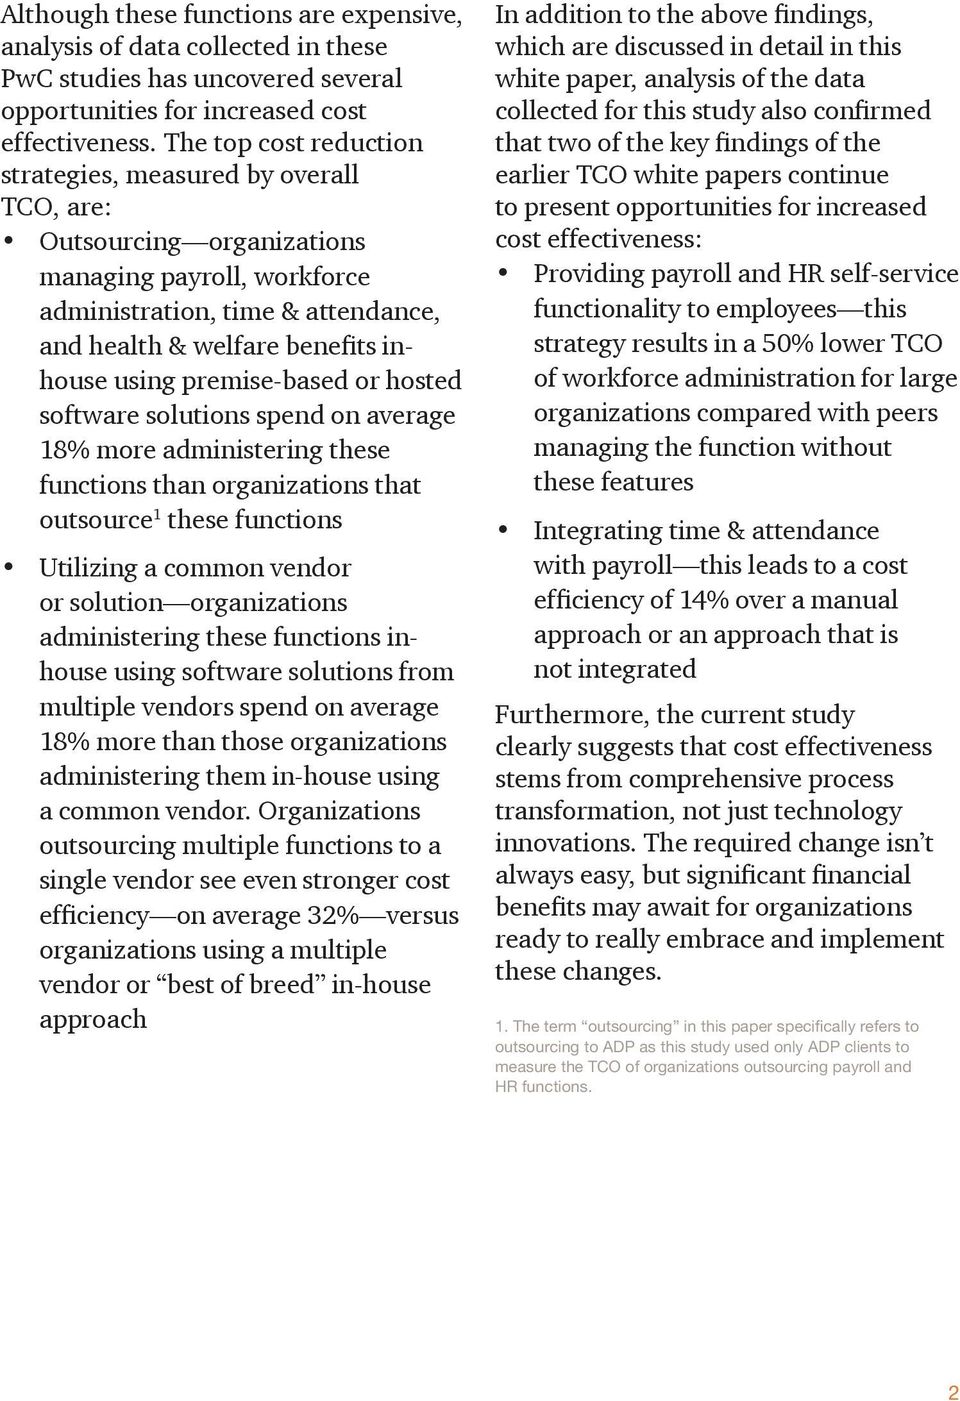 premise-based or hosted software solutions spend on average 18% more administering these functions than organizations that outsource 1 these functions Utilizing a common vendor or solution